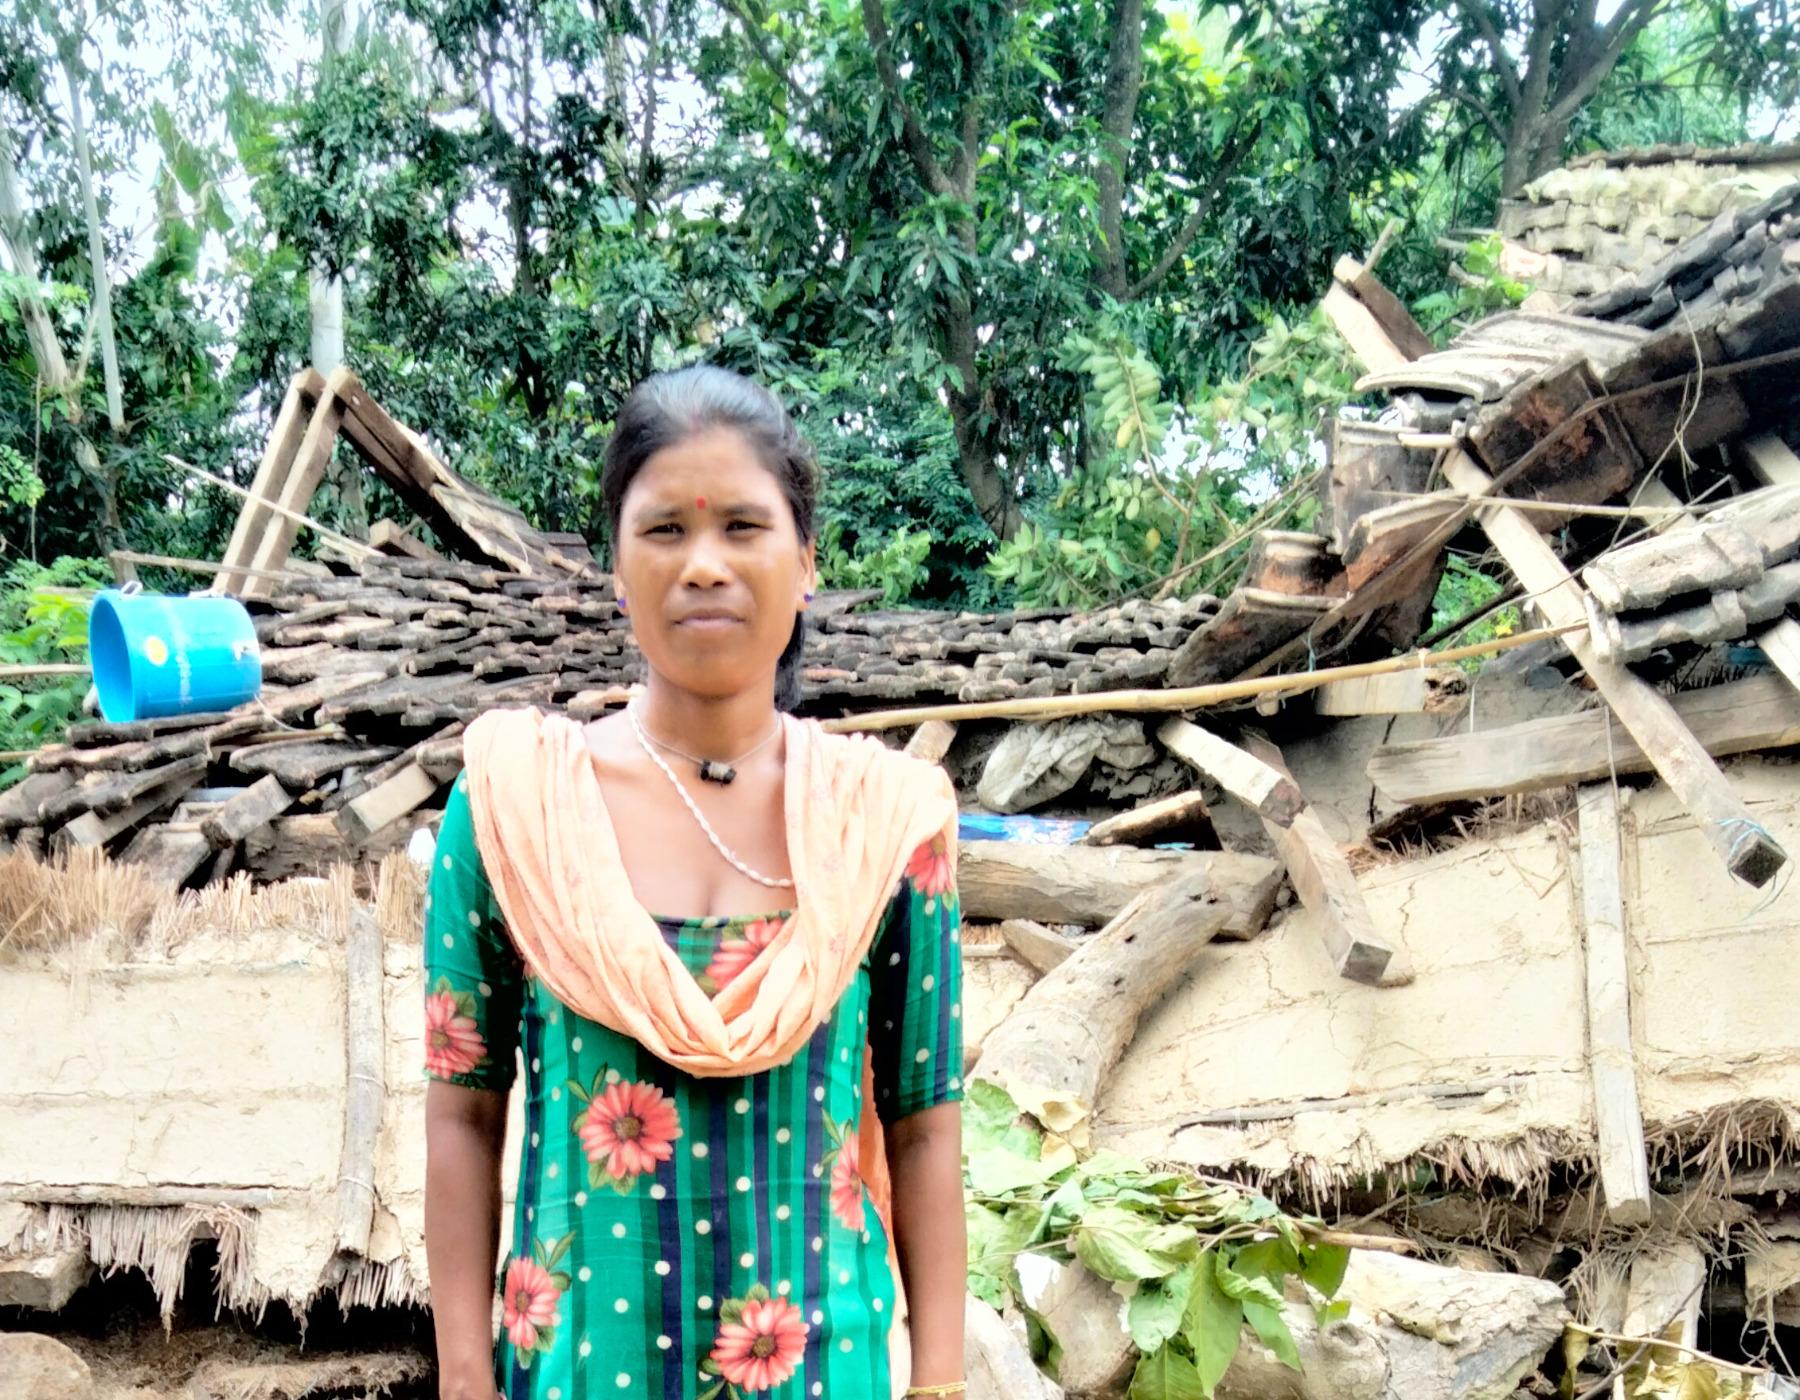 Rekha Chaudhary in front of her house, which was damaged in the floods. Photo: LWF Nepal